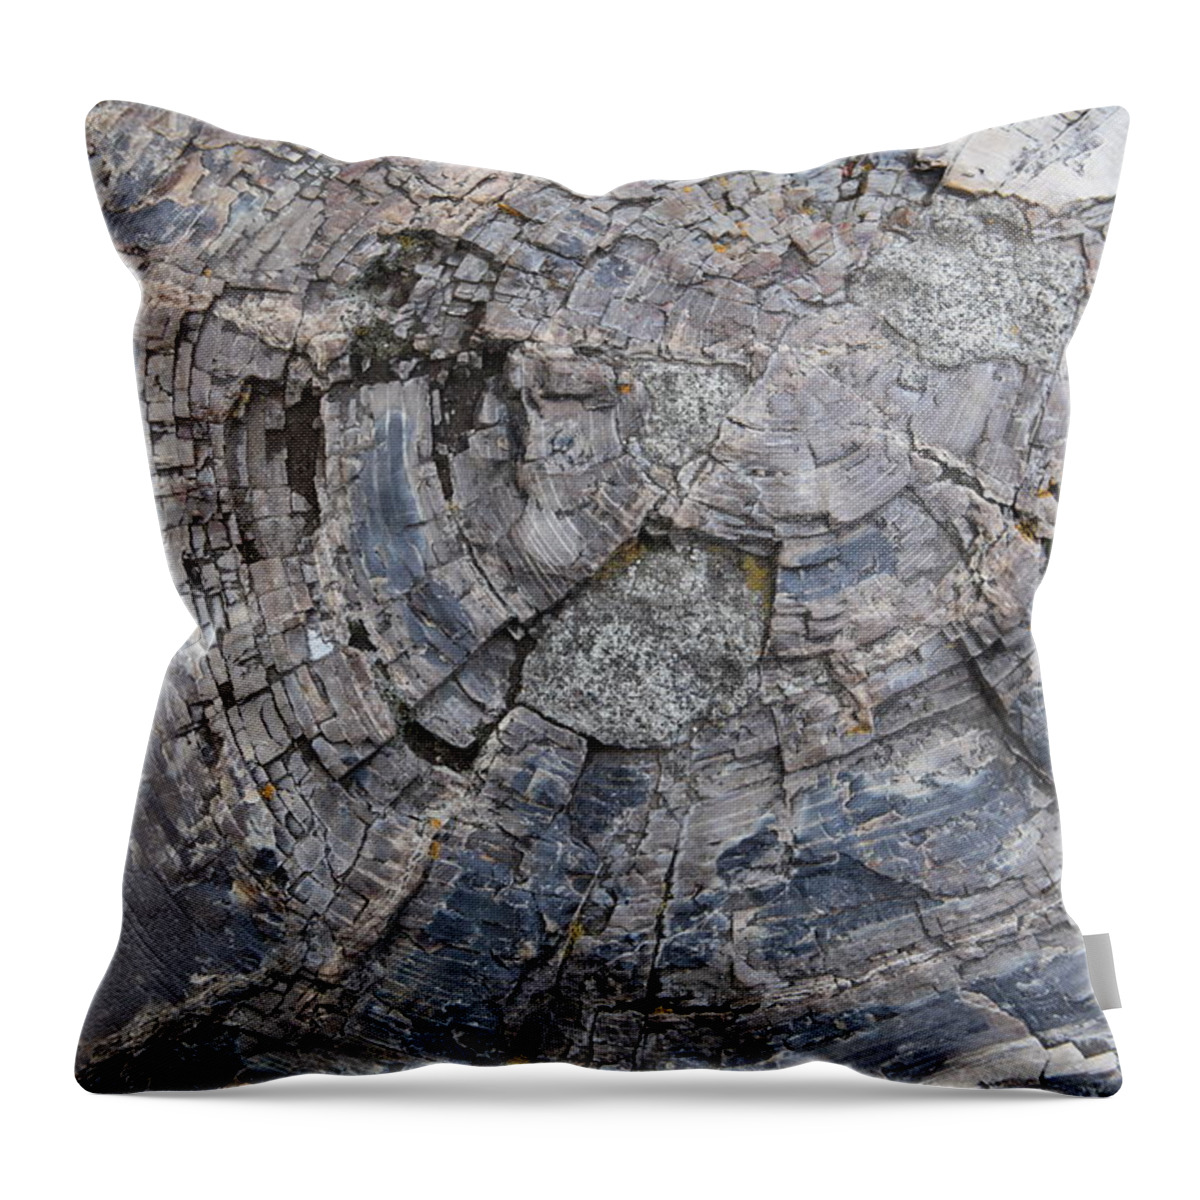 Texture Throw Pillow featuring the photograph Yellowstone 3707 by Michael Fryd